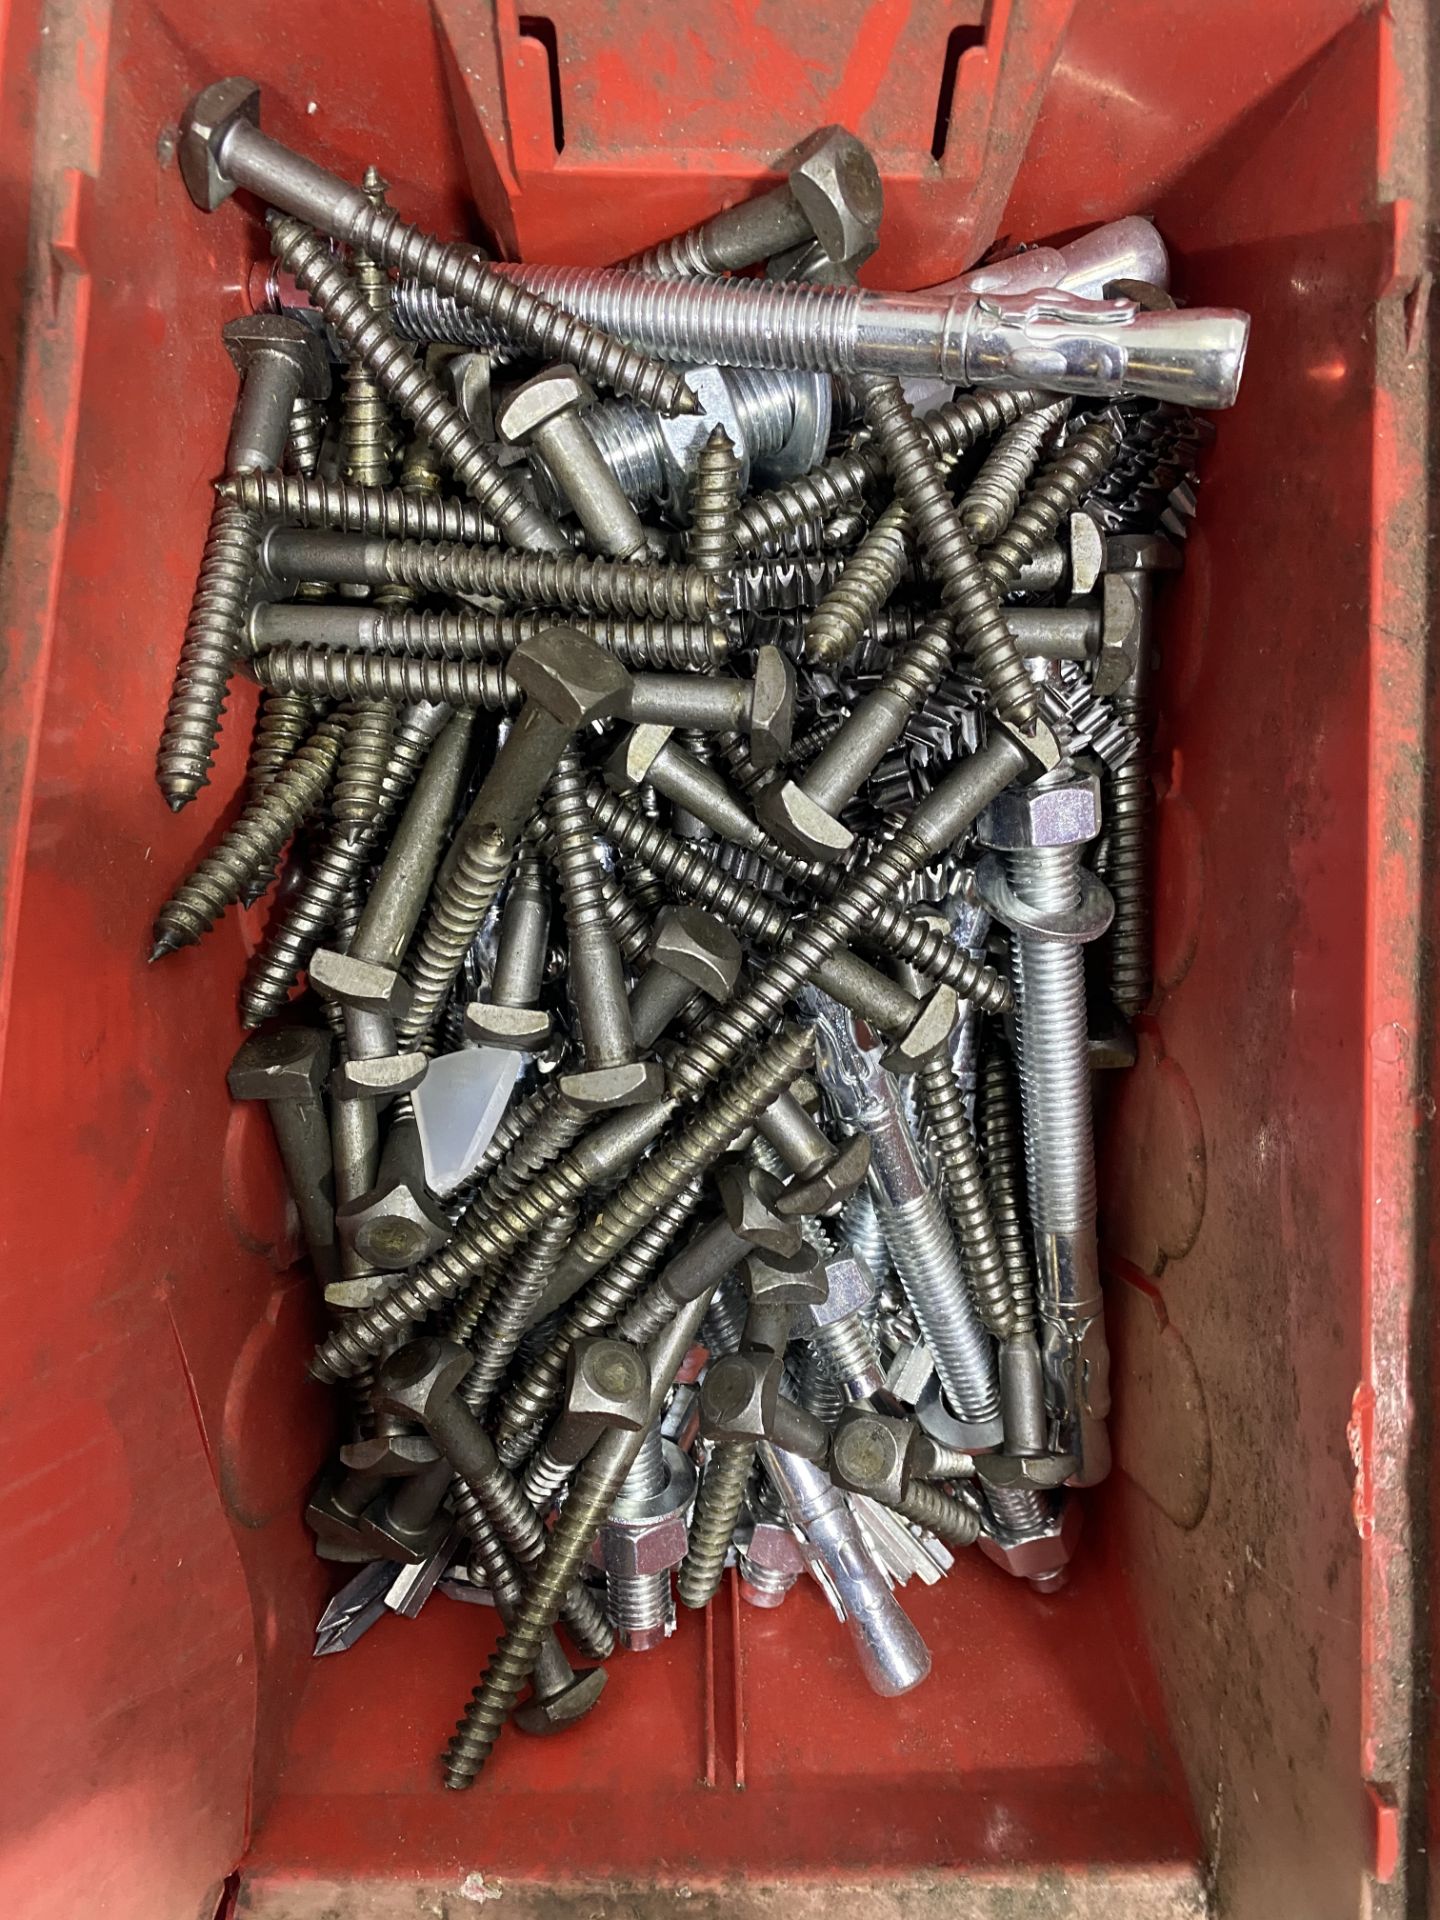 Large Quantity Of Screws,Nuts,Bolts,Fasteners And Various Other Equipment - Image 19 of 20